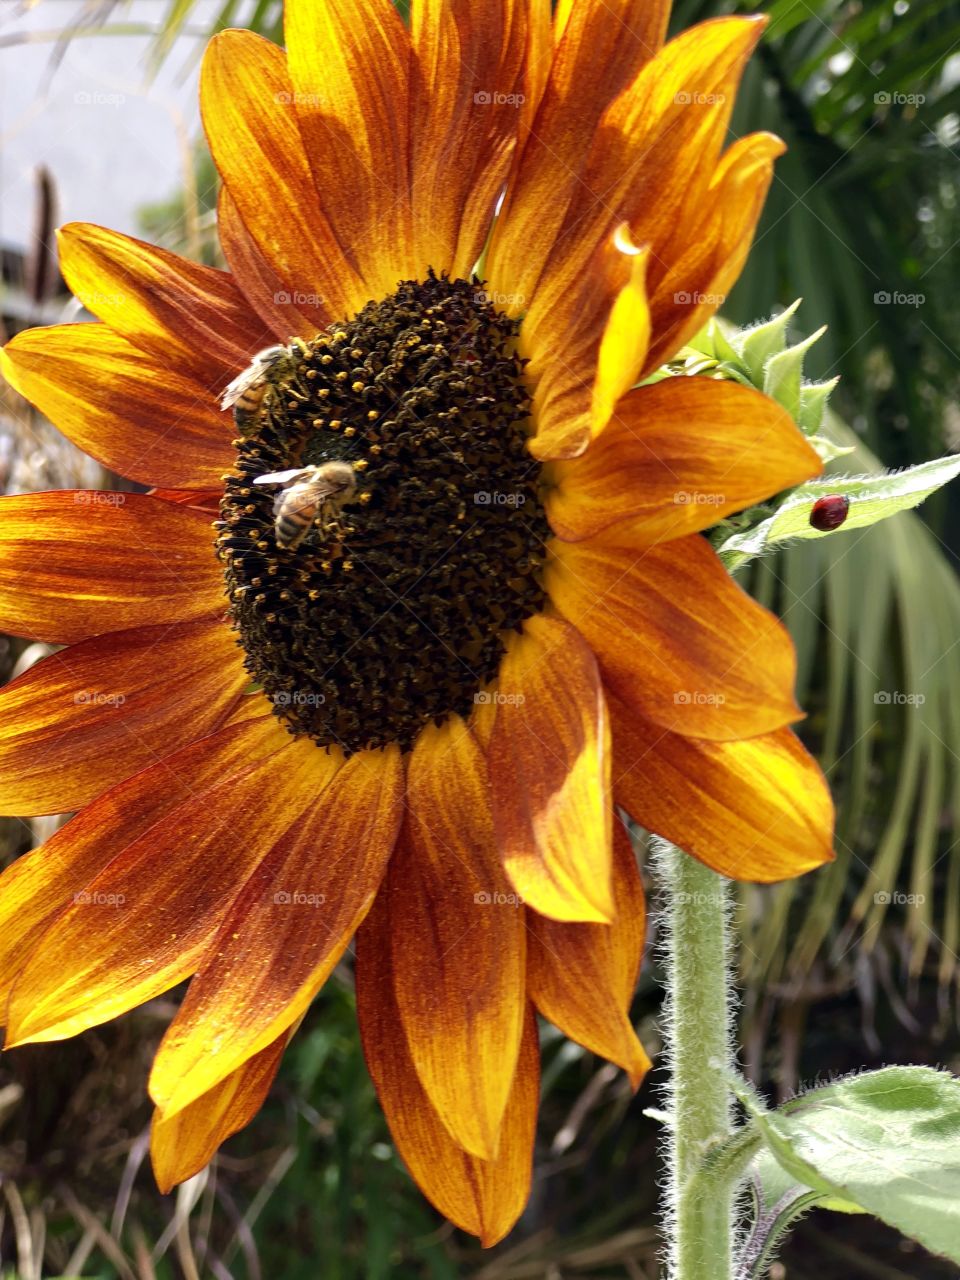 Sunflowers, Bees and Lady Bugs 🐜